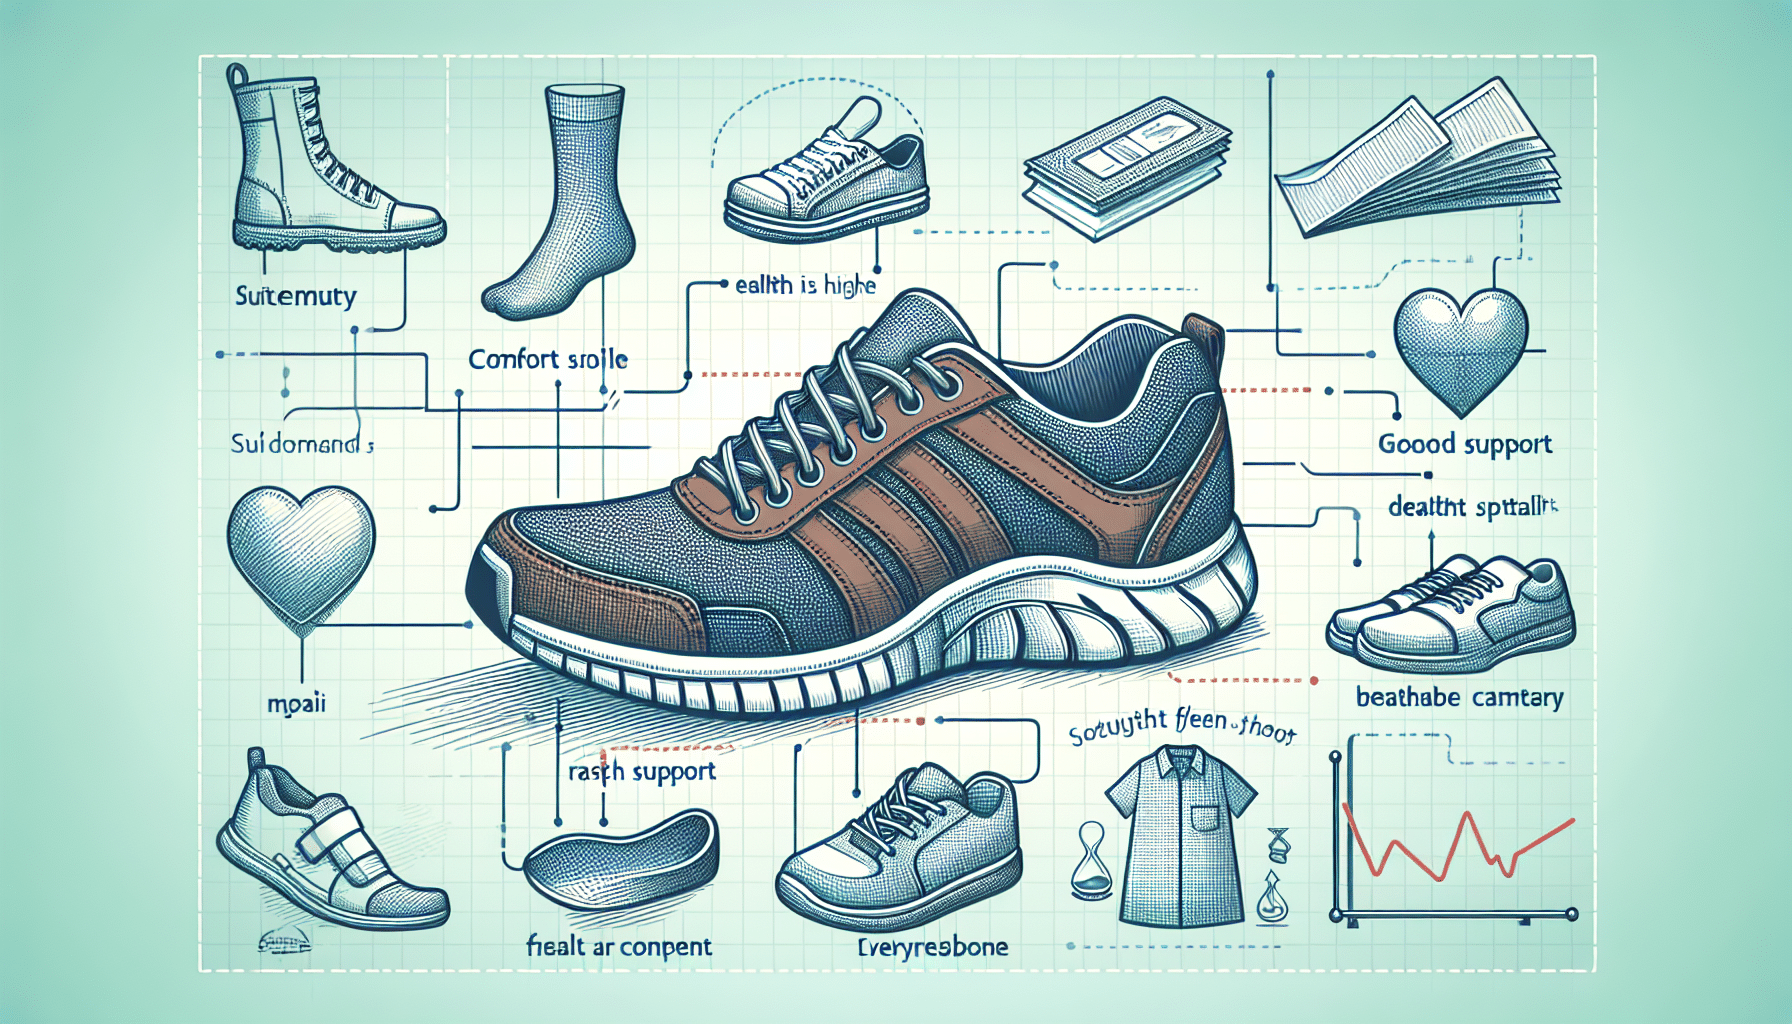 learn how to select the perfect walking shoes to maintain your health and comfort. explore the essential factors to consider when choosing the right footwear for walking.